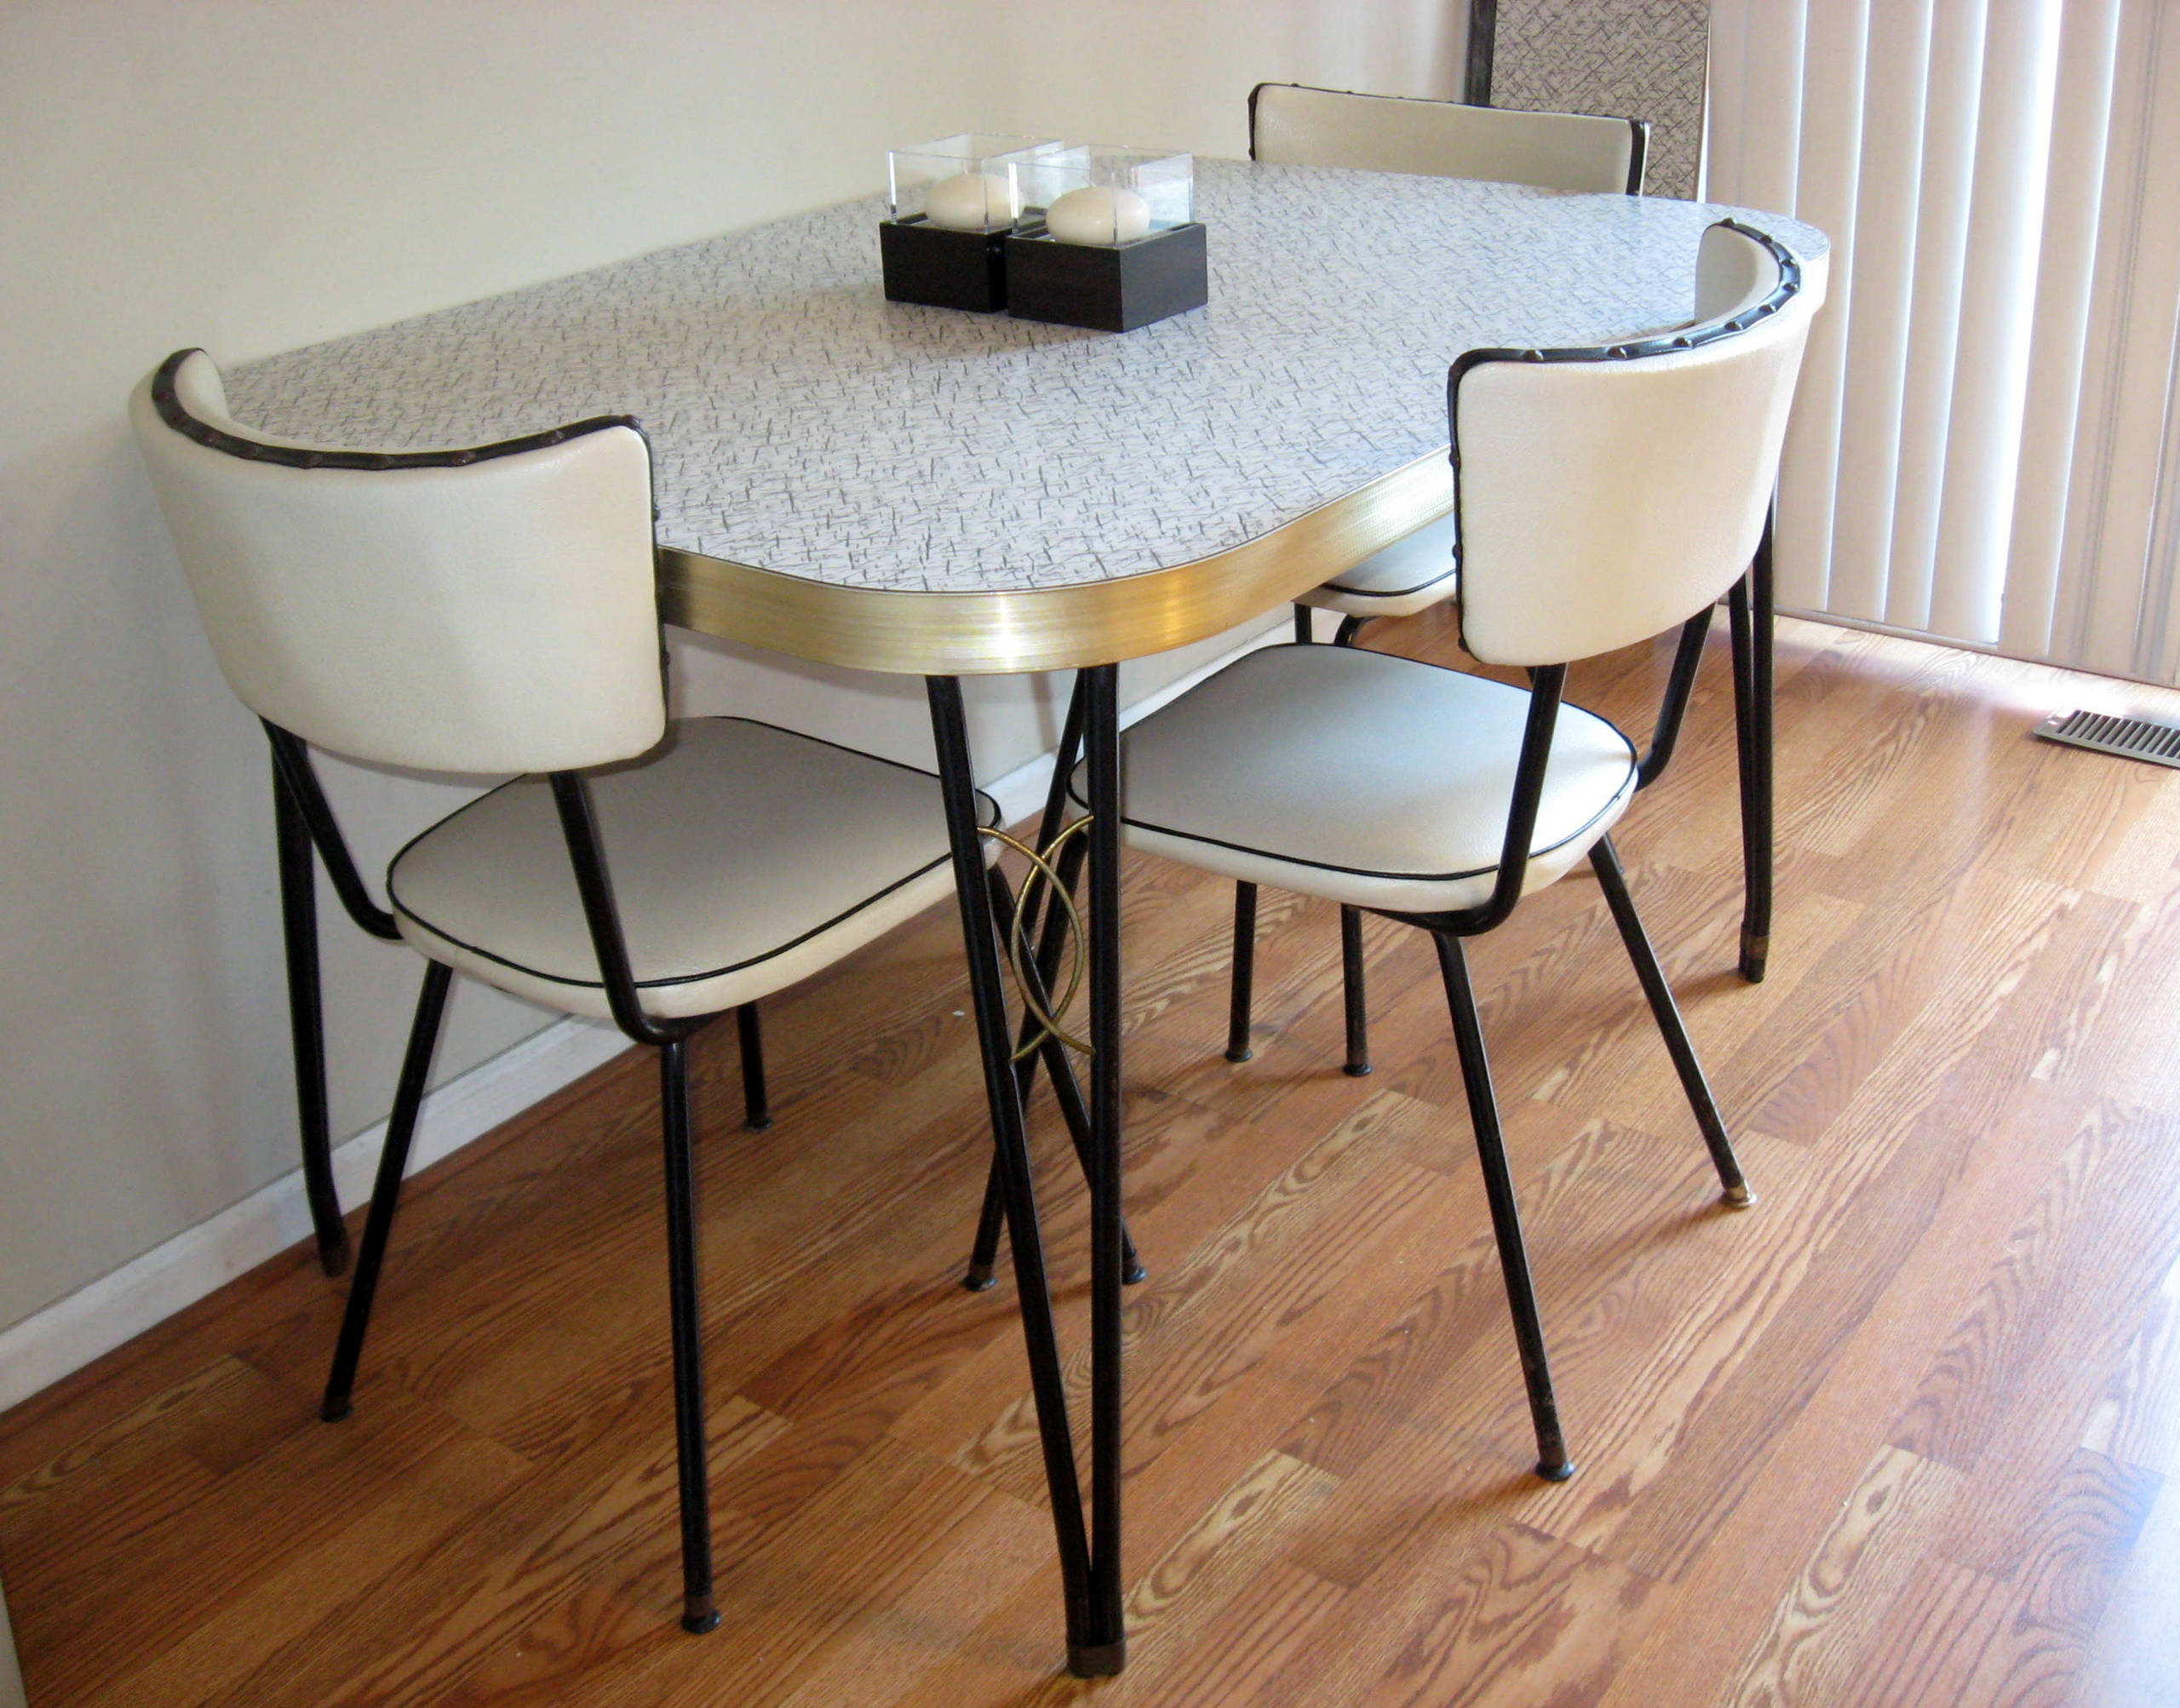 Retro Kitchen Table And Chairs Visualhunt, Vintage Metal Kitchen Table And Chairs Set